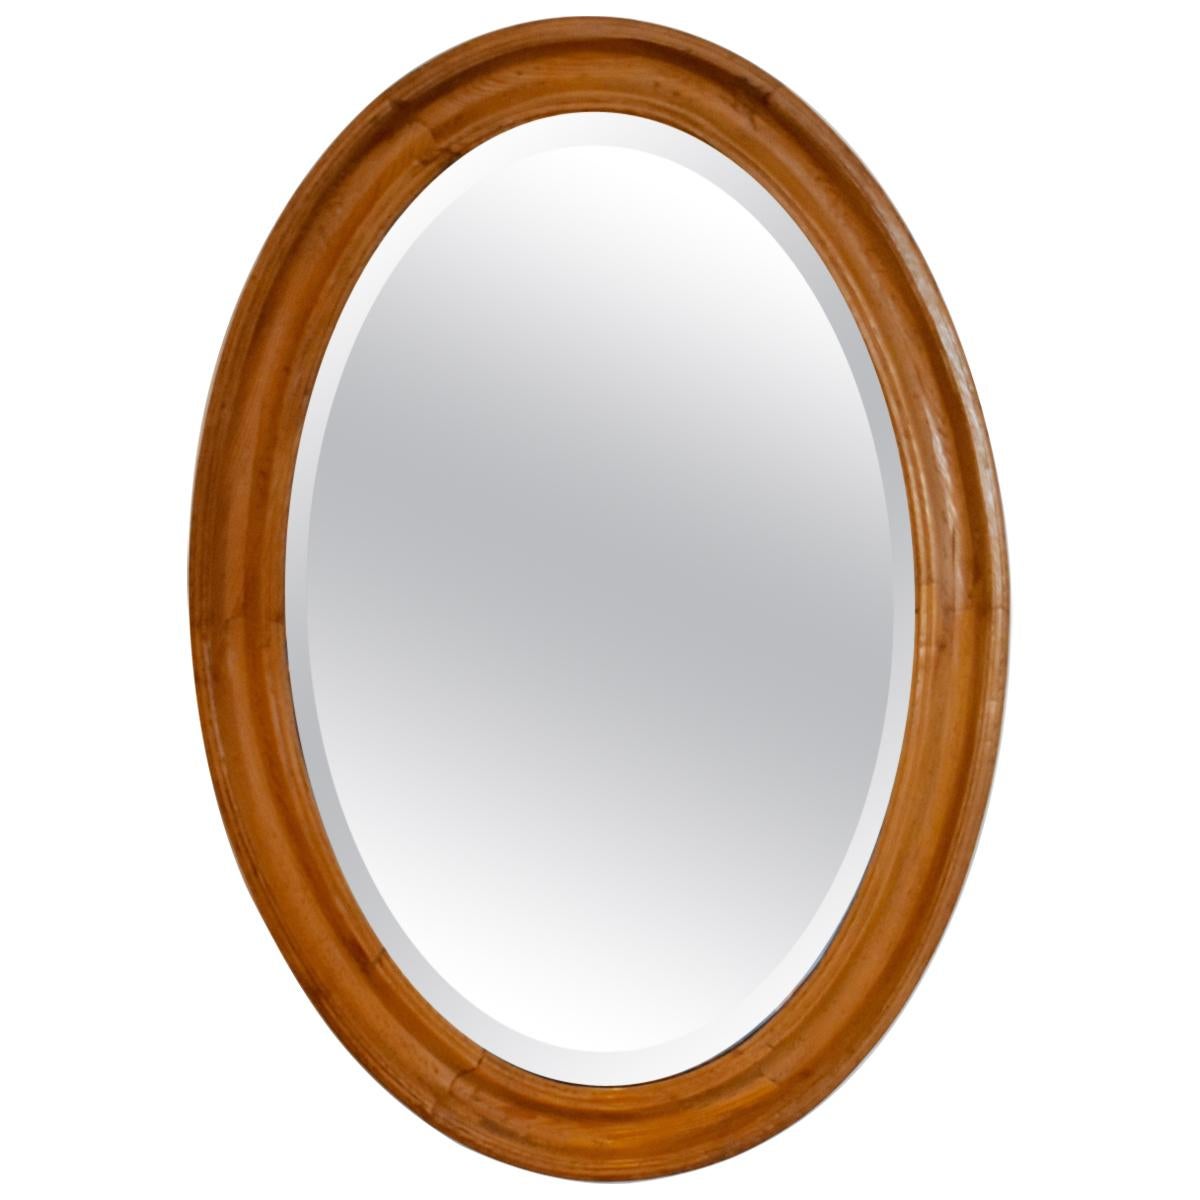 Pine-Framed Oval Beveled Wall Mirror